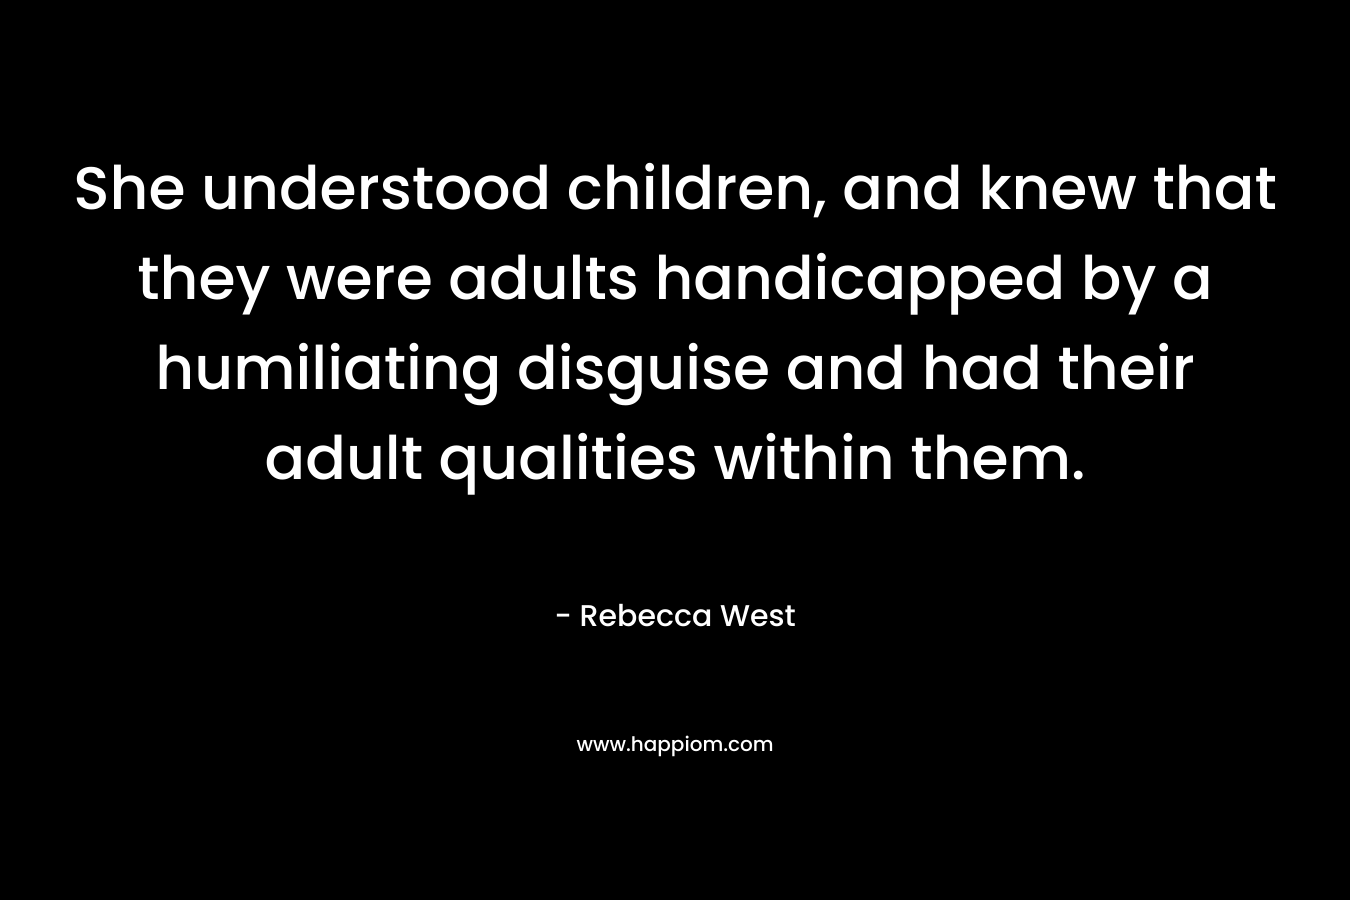 She understood children, and knew that they were adults handicapped by a humiliating disguise and had their adult qualities within them. – Rebecca West